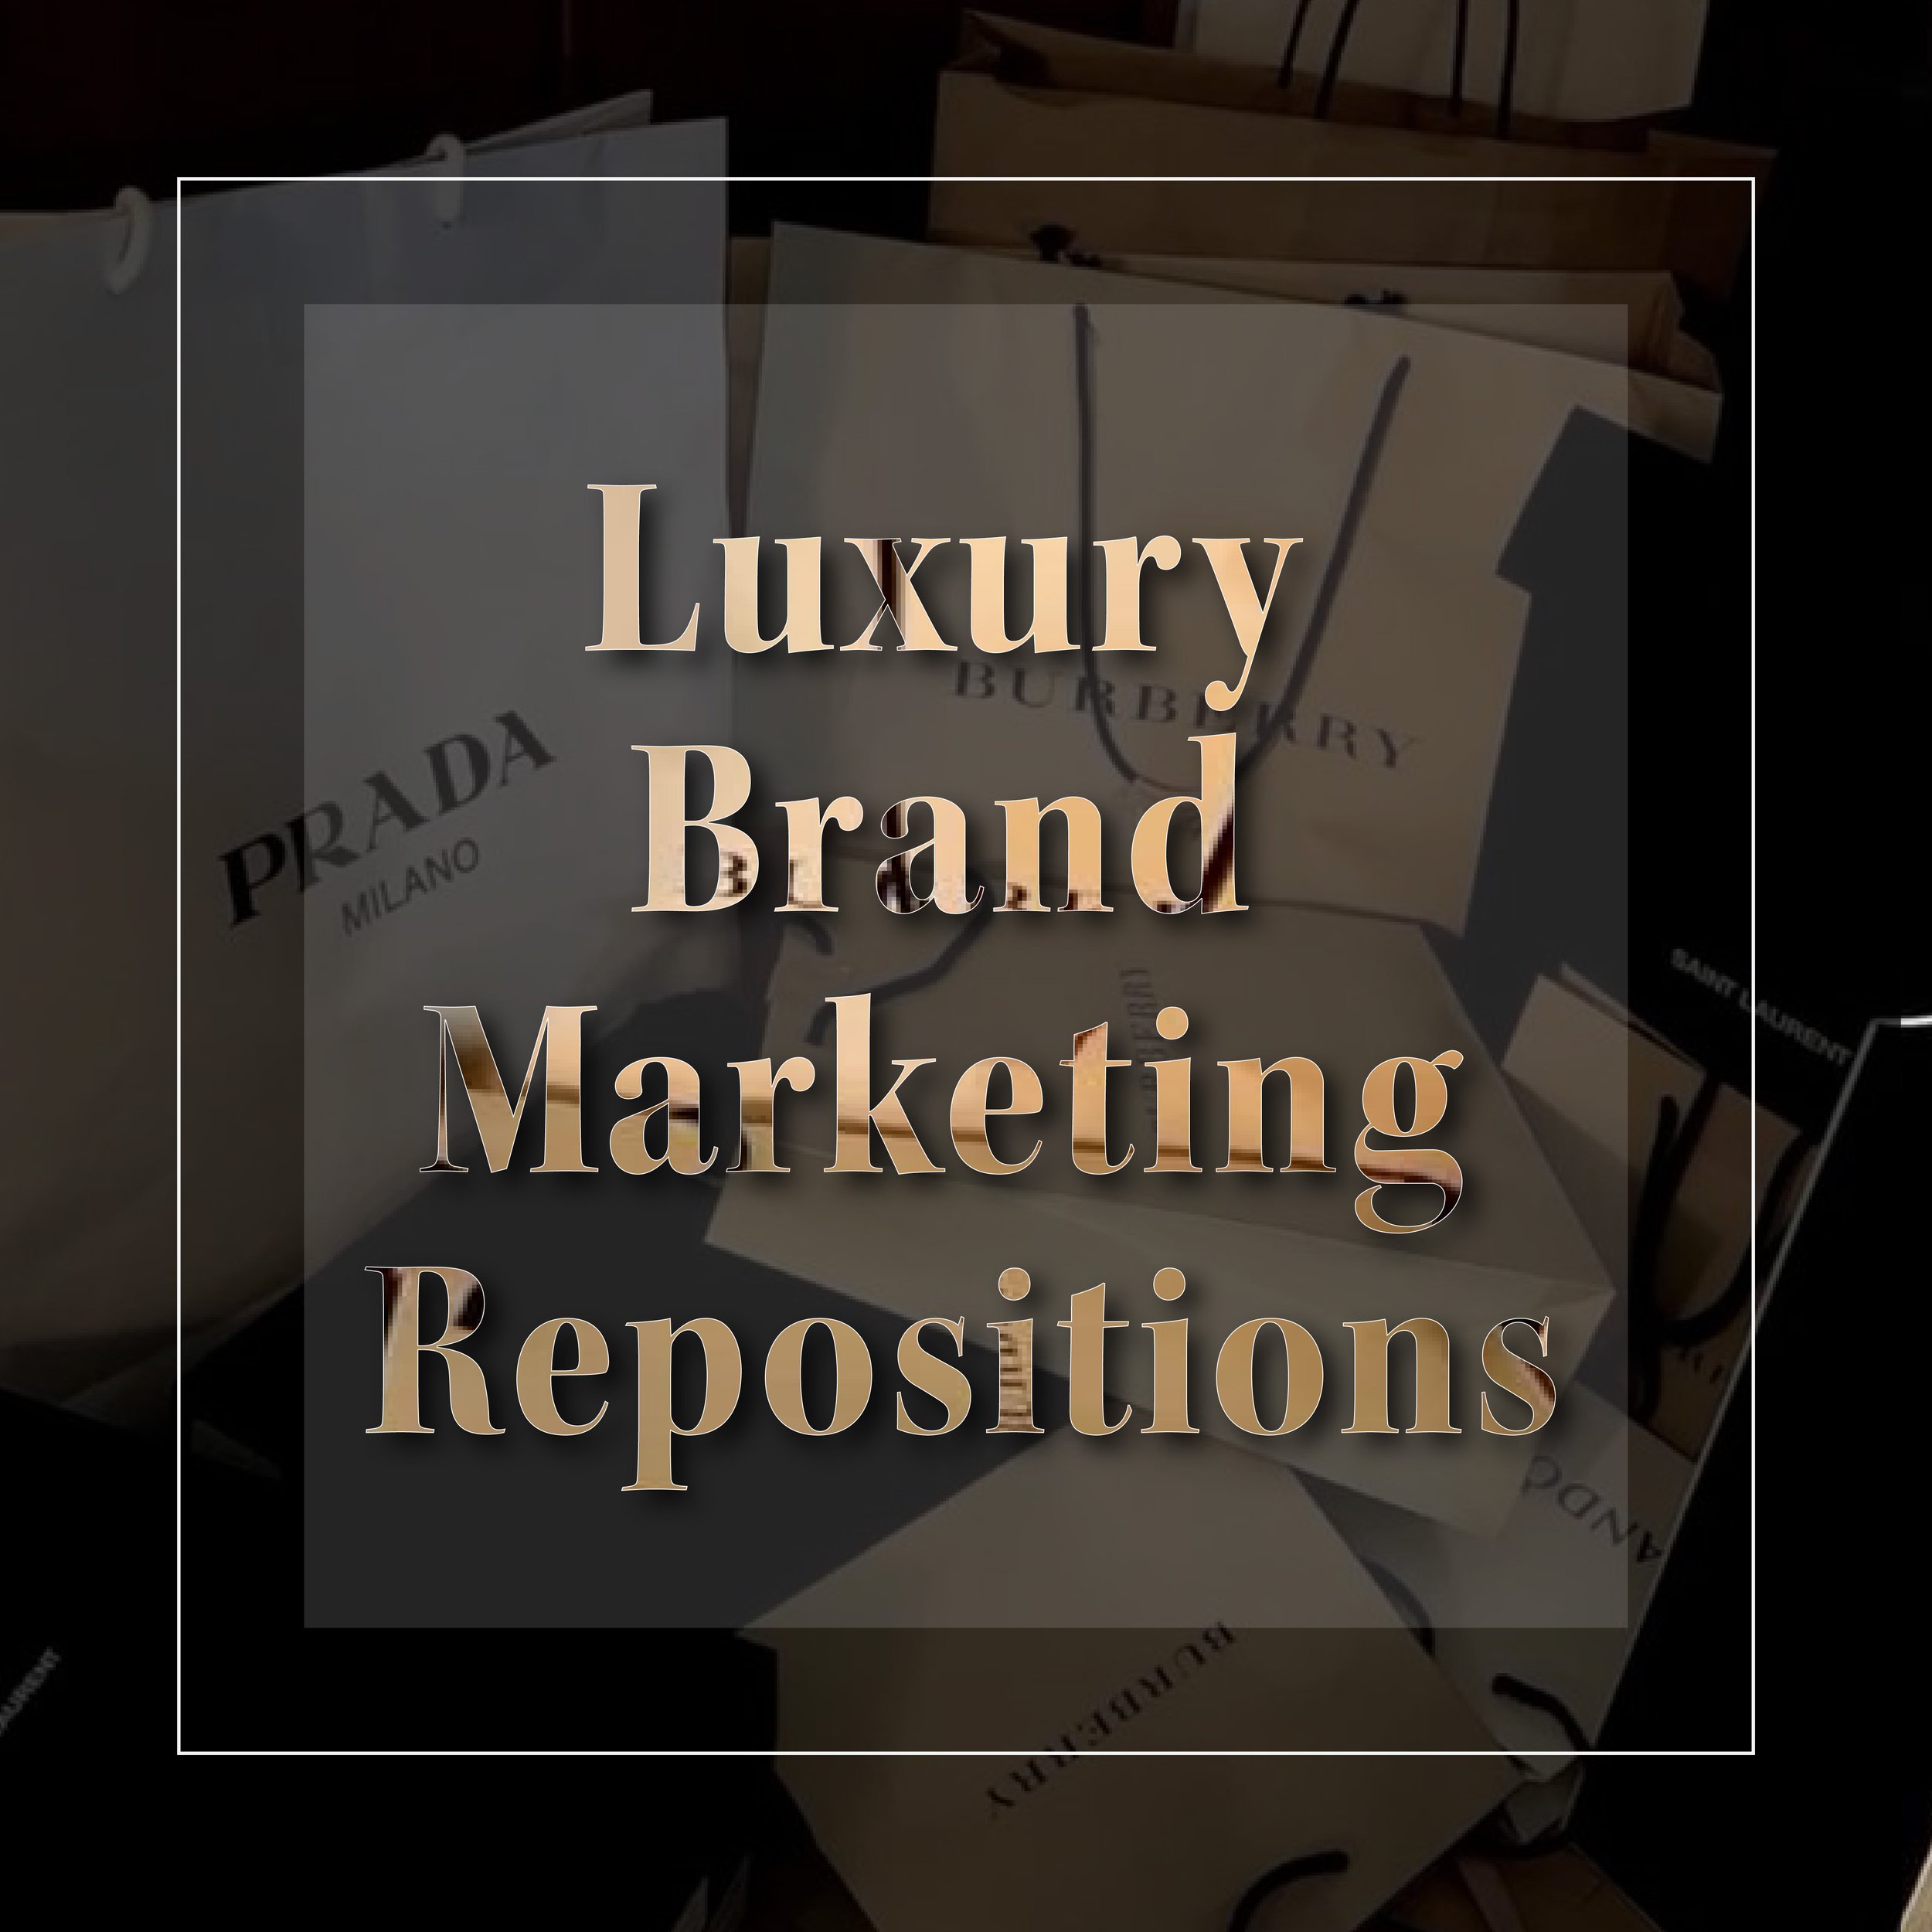 What is so special about brands like Gucci and Louis Vuitton for